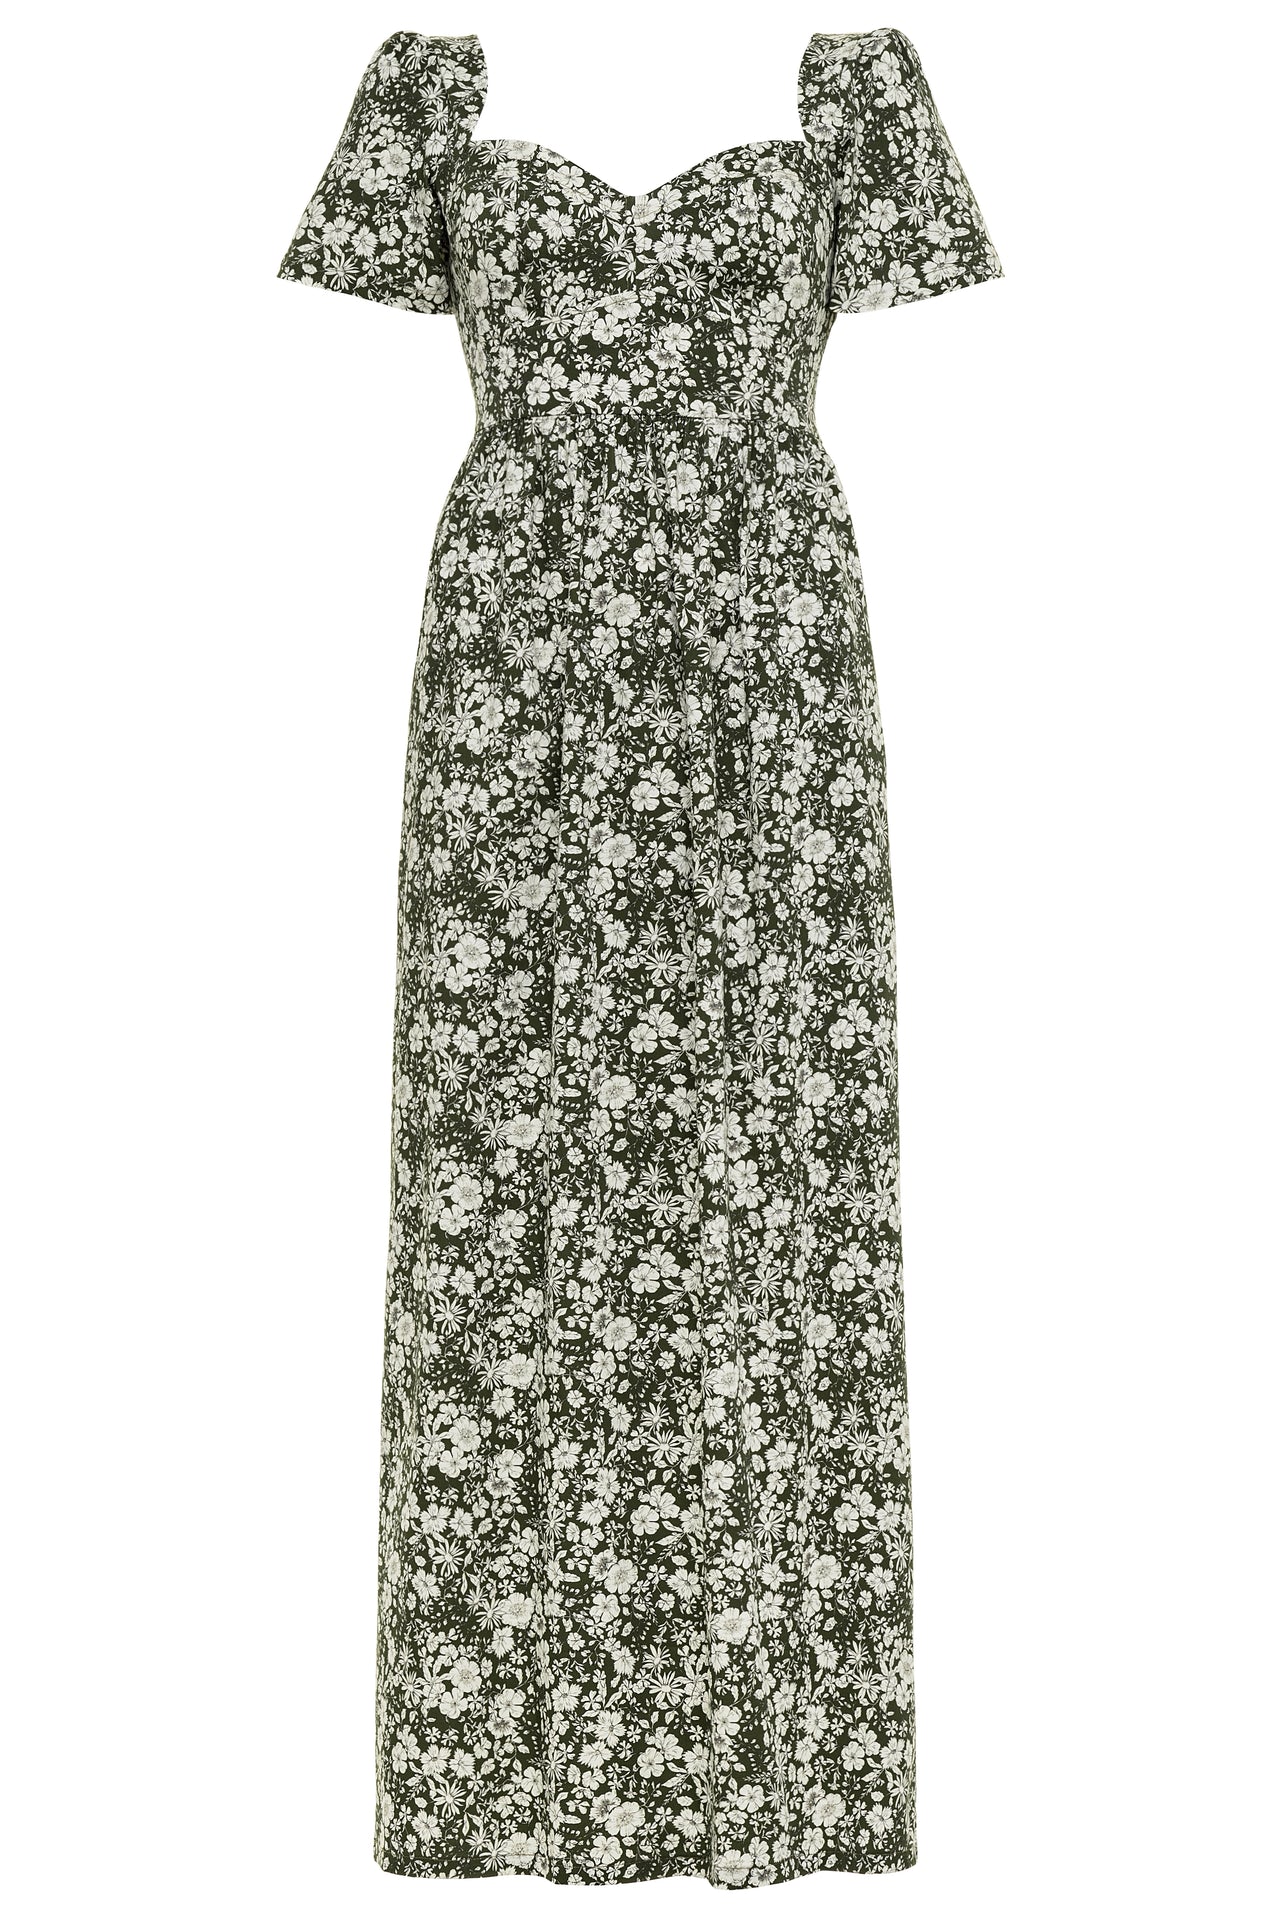 Poppy Maxi Dress with a Sweetheart Neckline and Sculpted Bodice / Forest Green + Vintage White Floral Cotton